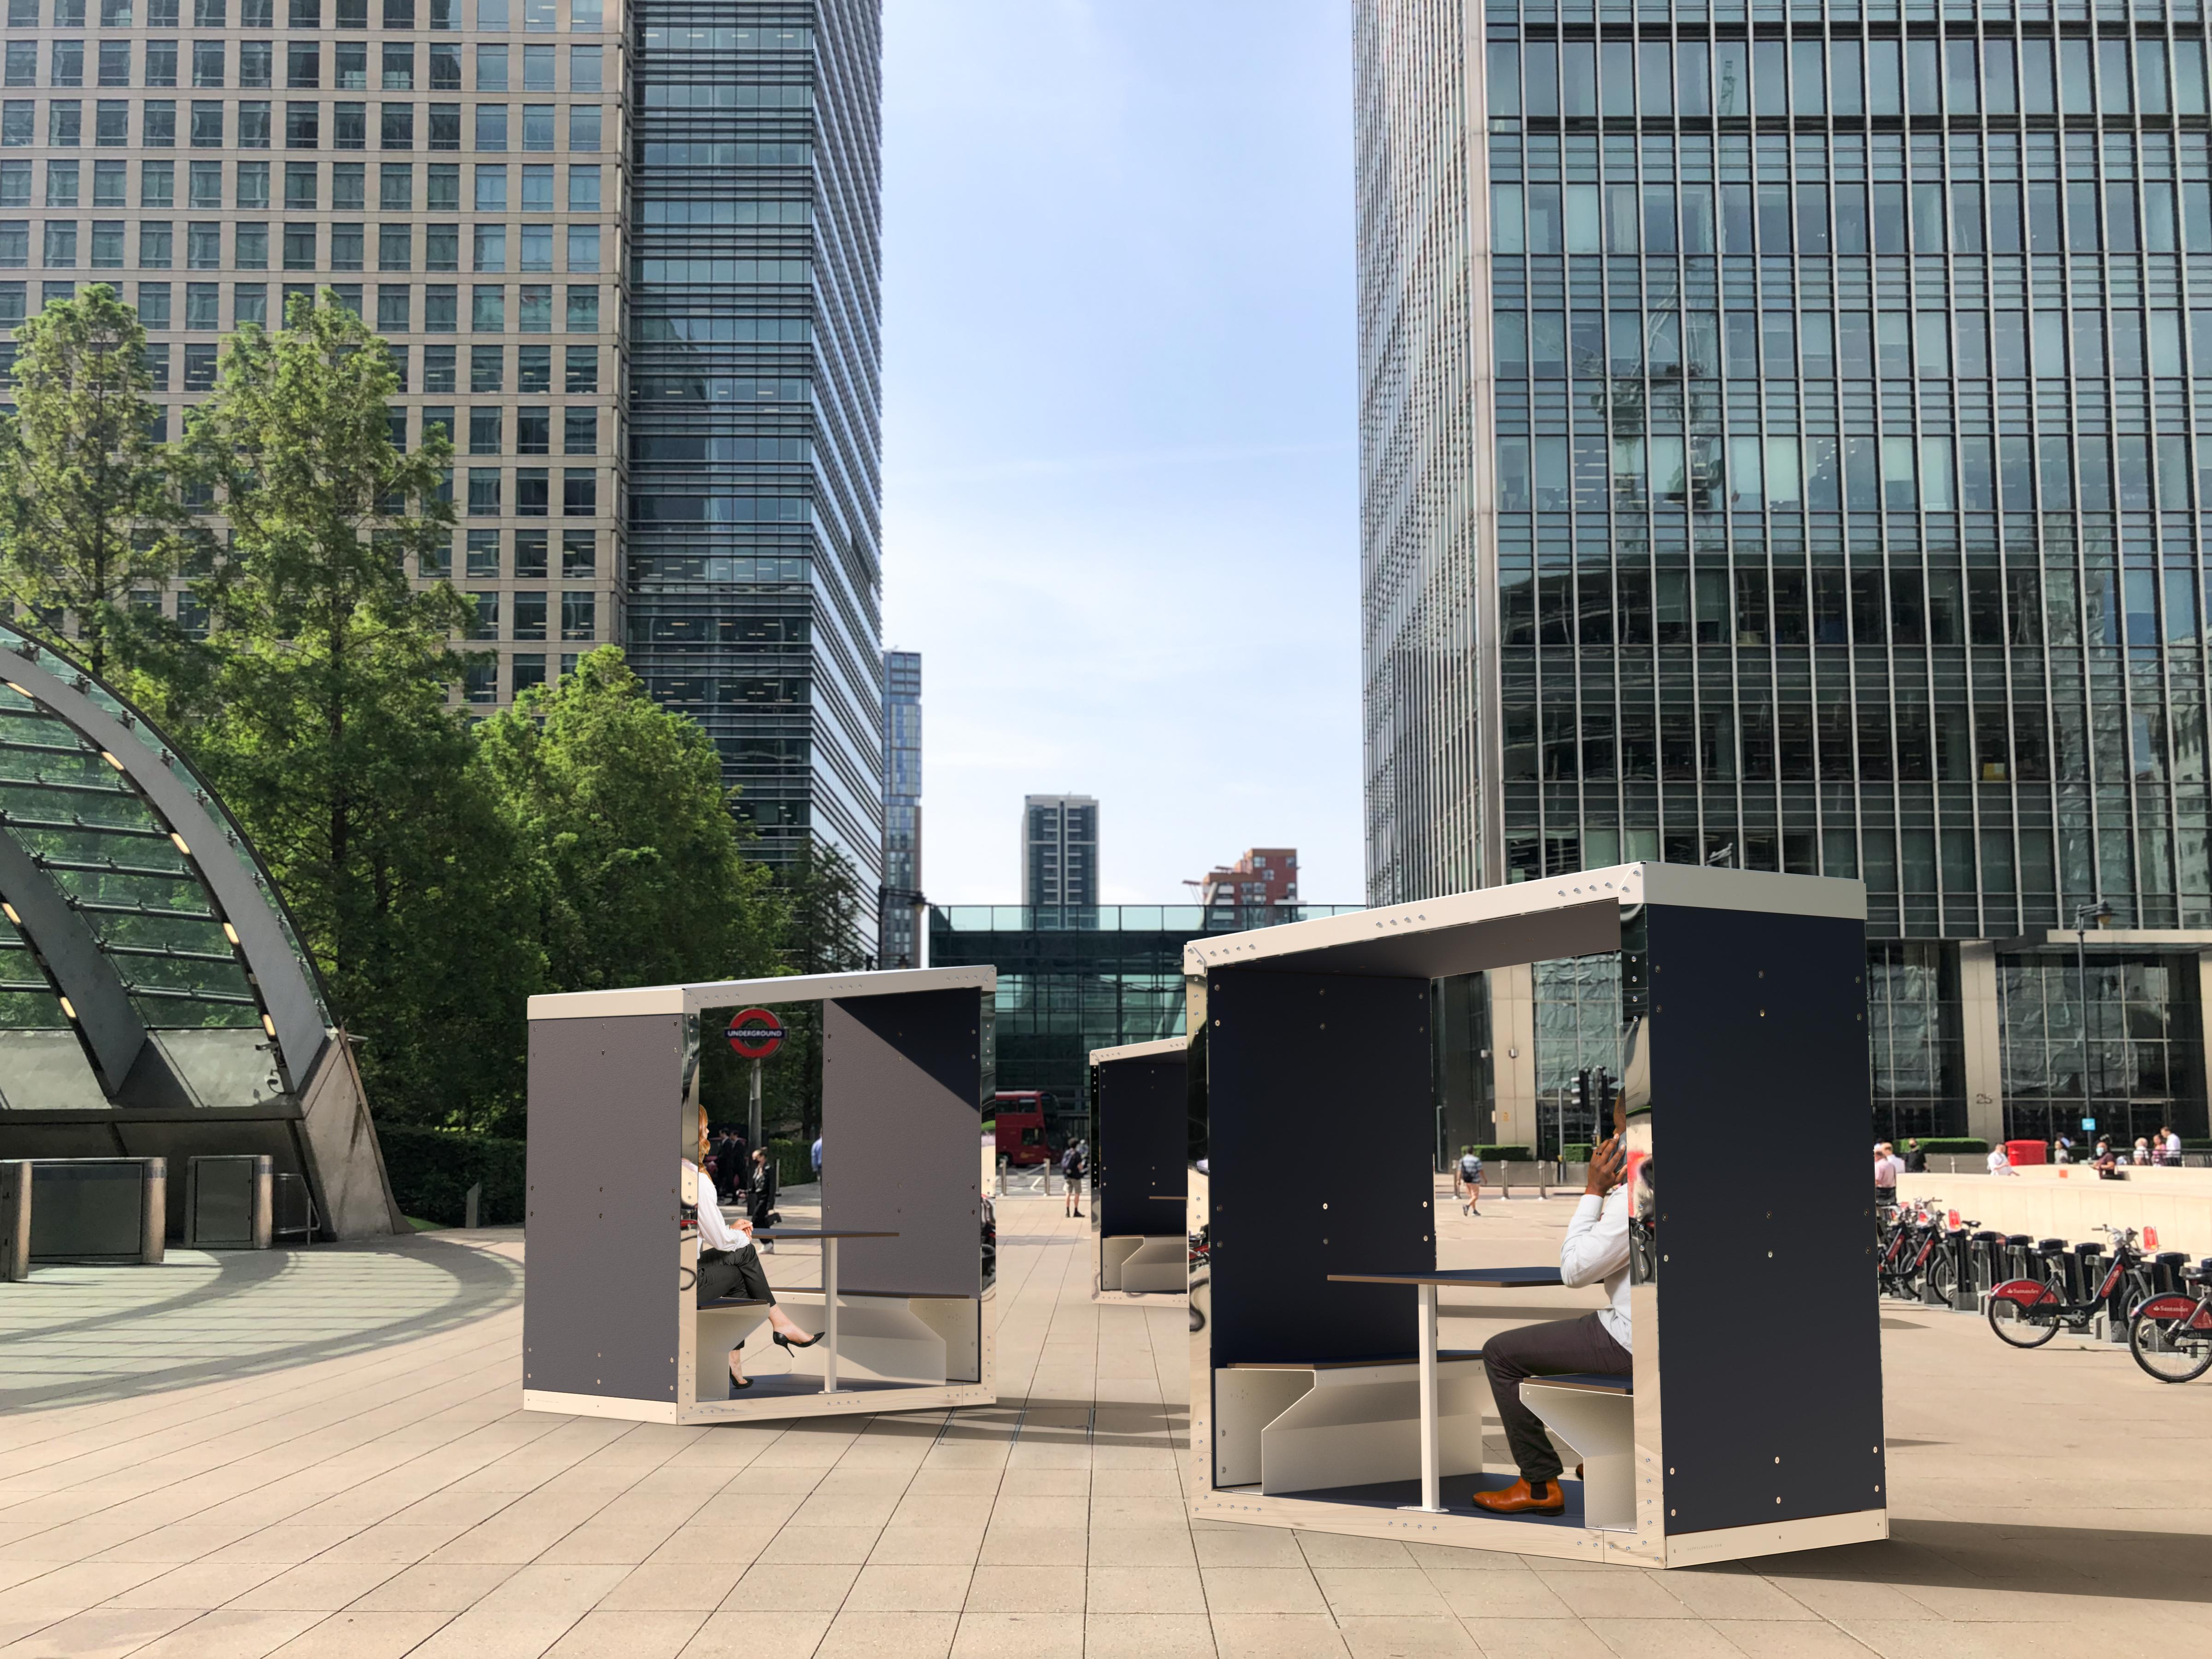 Designed for outdoor use, the Minka Solar is the natural evolution of the Japanese-inspired Minka Pod.

A sophisticated addition to any outdoor area, the Minka Solar meeting POD breaks up open spaces and provides a comfortable, contemporary go-to